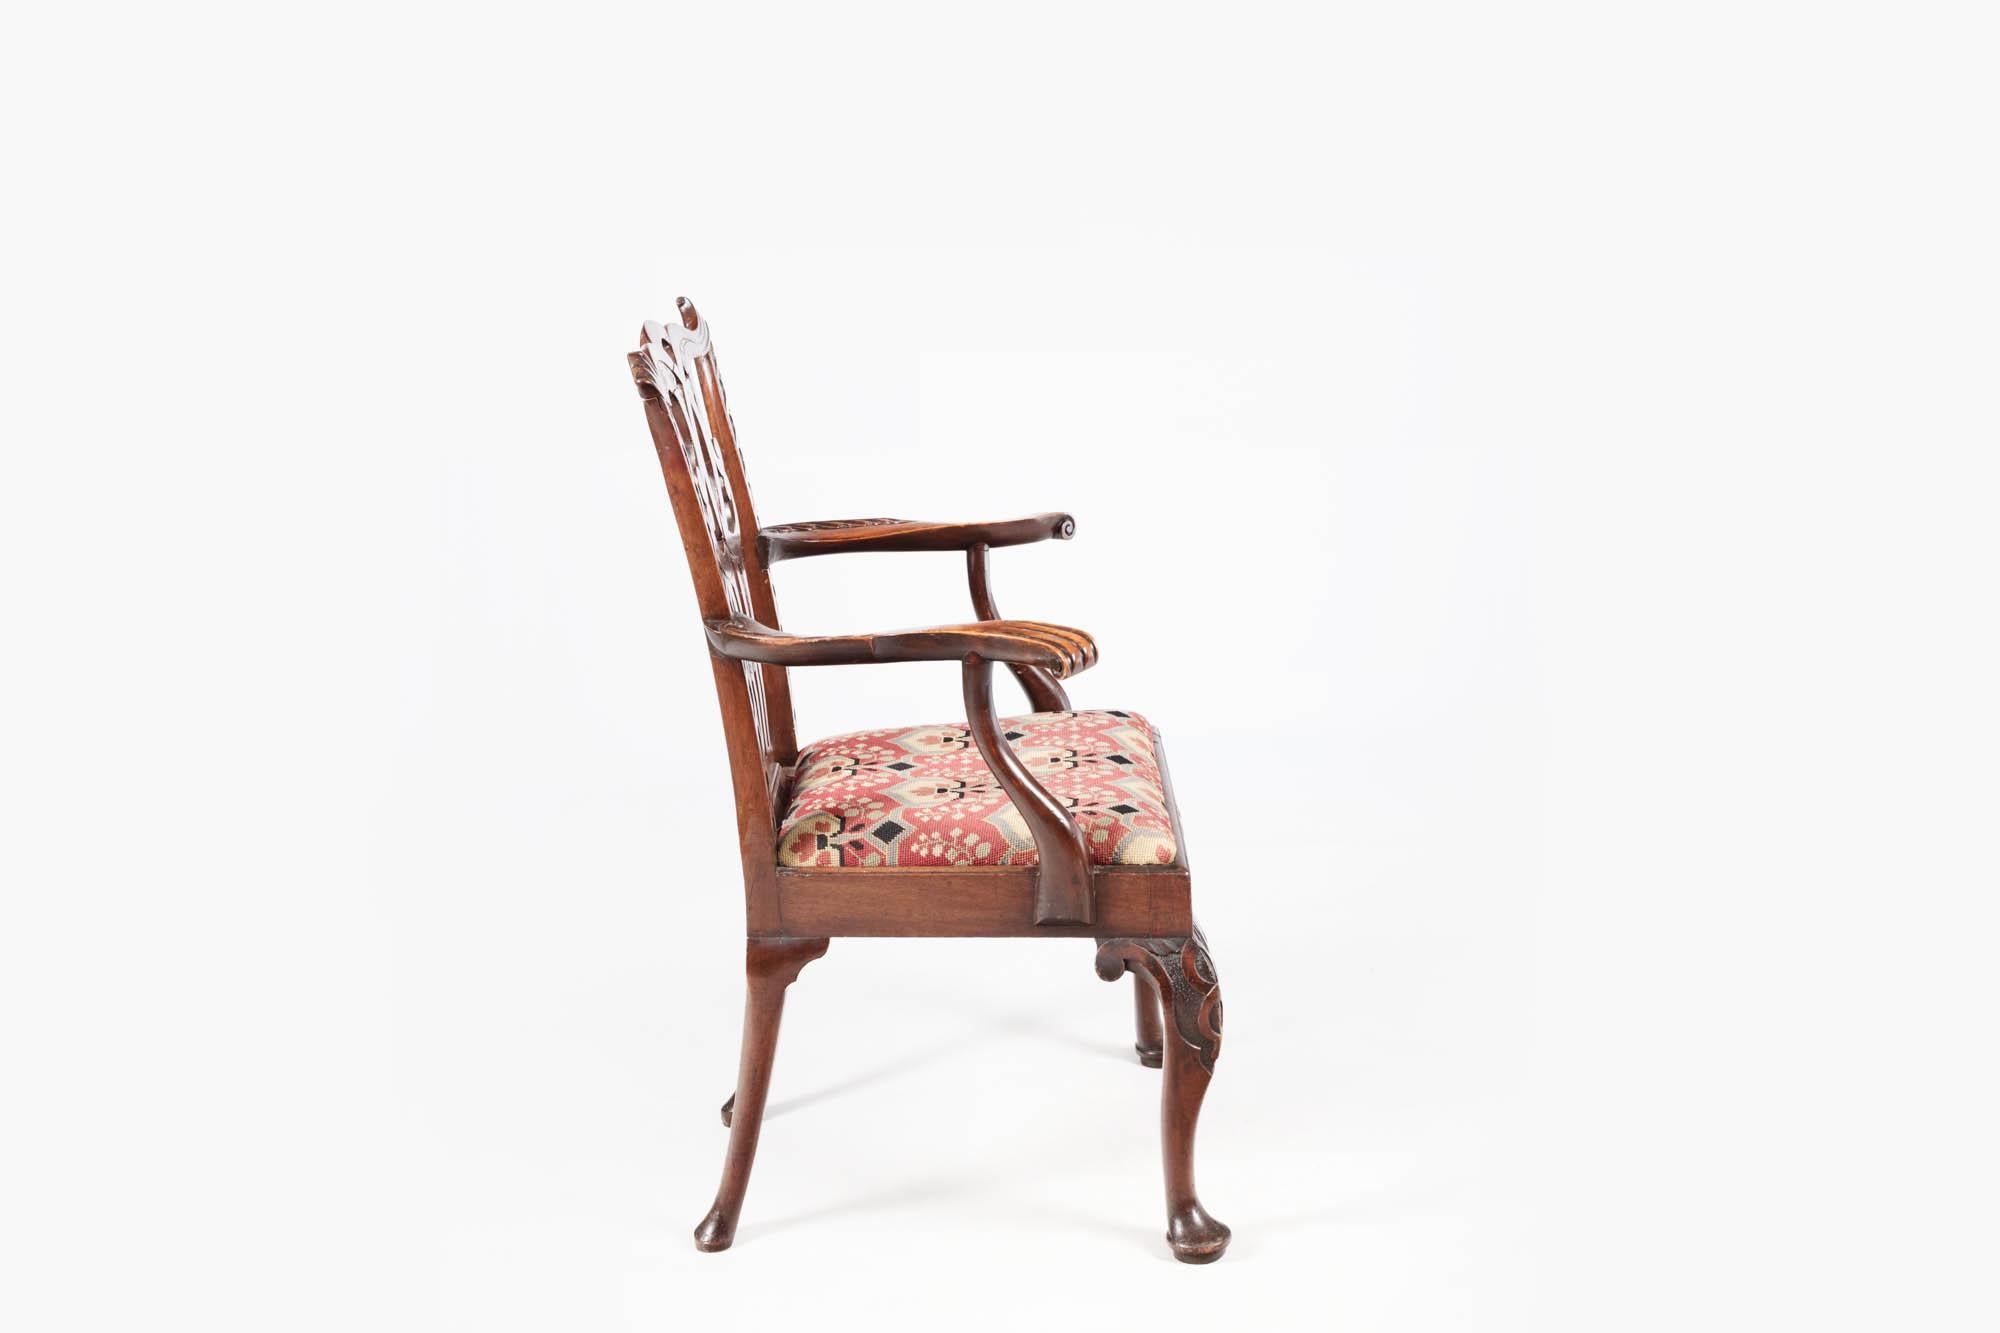 Pair of Chippendale-style carver chairs with drop-in needlework embroidered seats, pierced splat backs and cabriole legs terminating on simple pad feet. This pair of carvers feature outcurved arms with downswept supports. The serpentine top rail